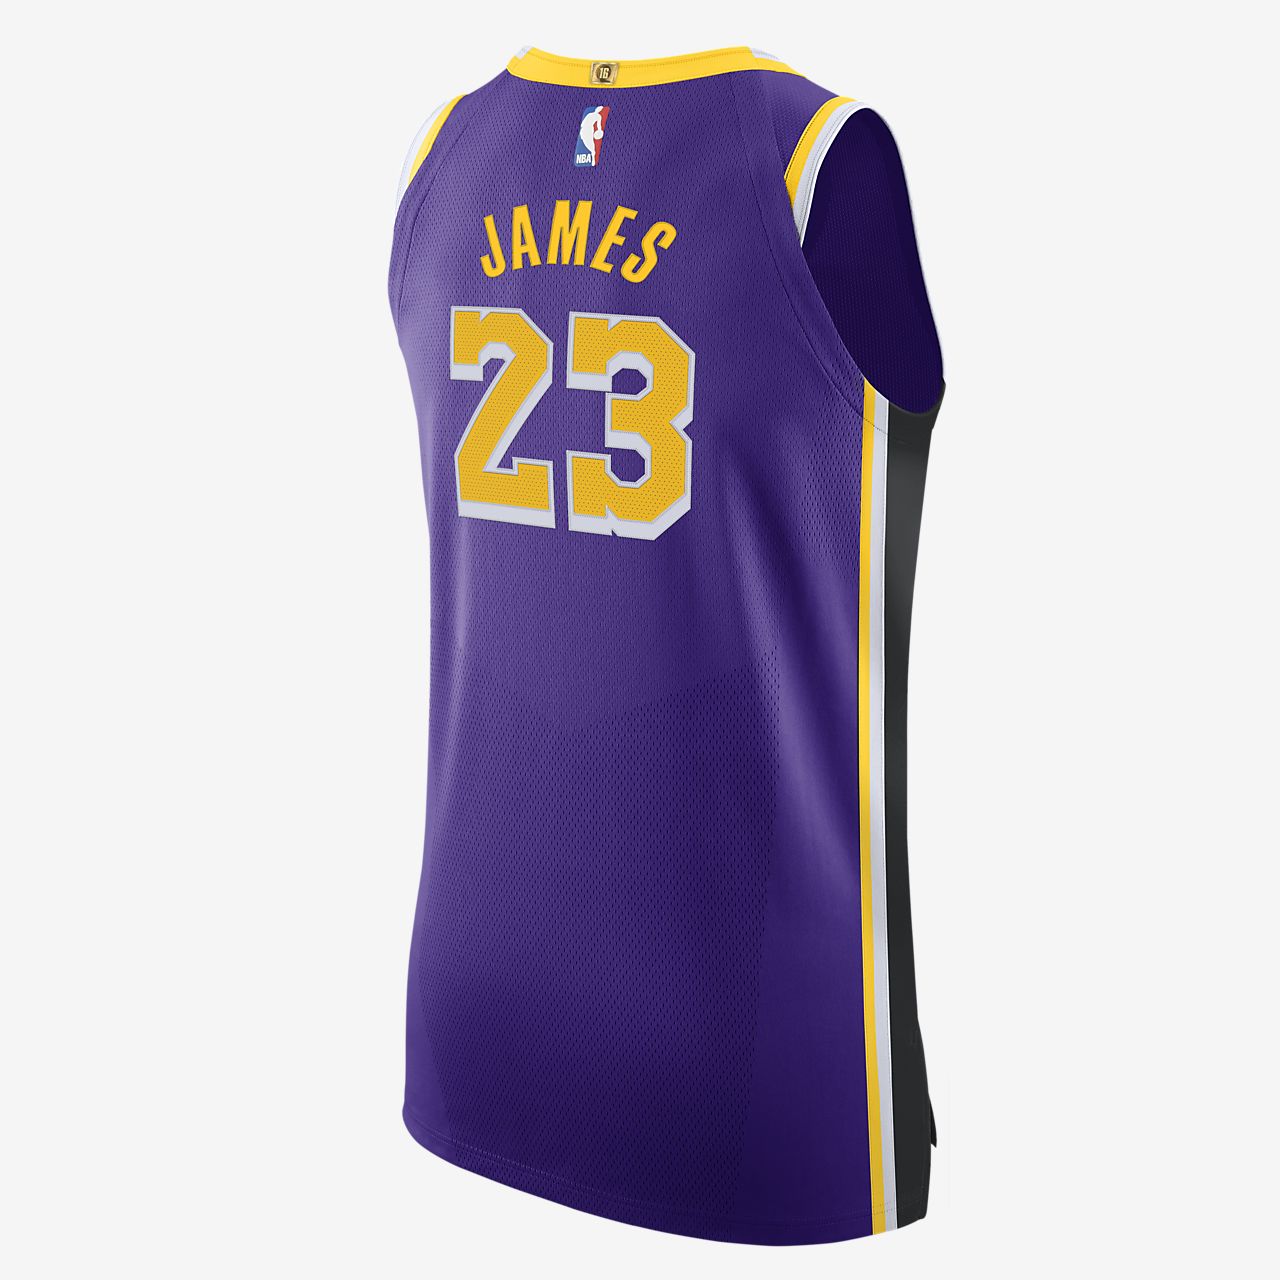 lakers jersey colors